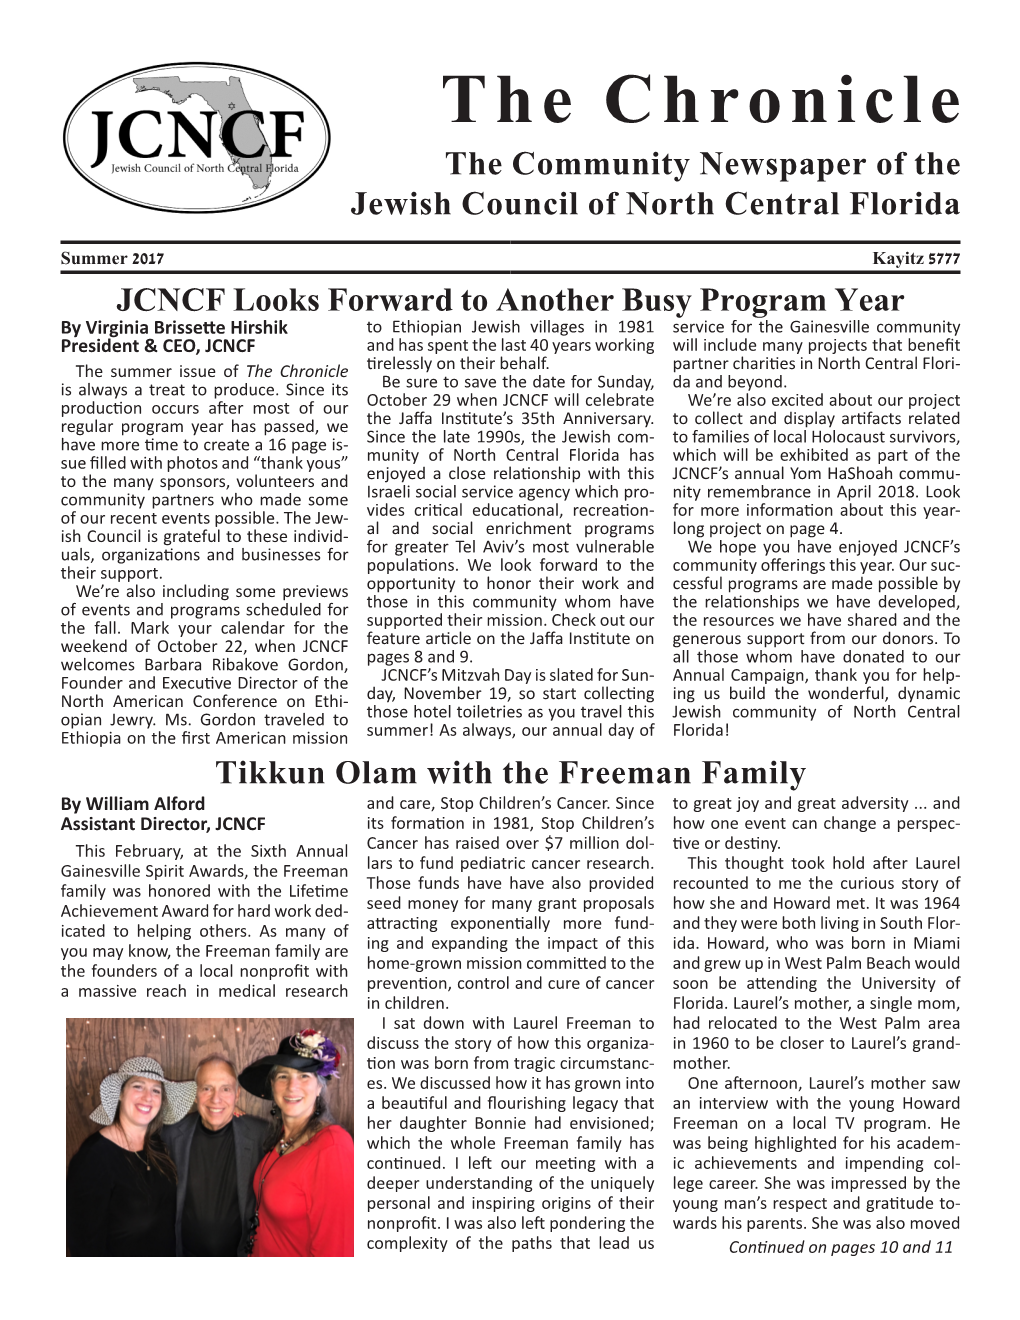 The Chronicle the Community Newspaper of the Jewish Council of North Central Florida